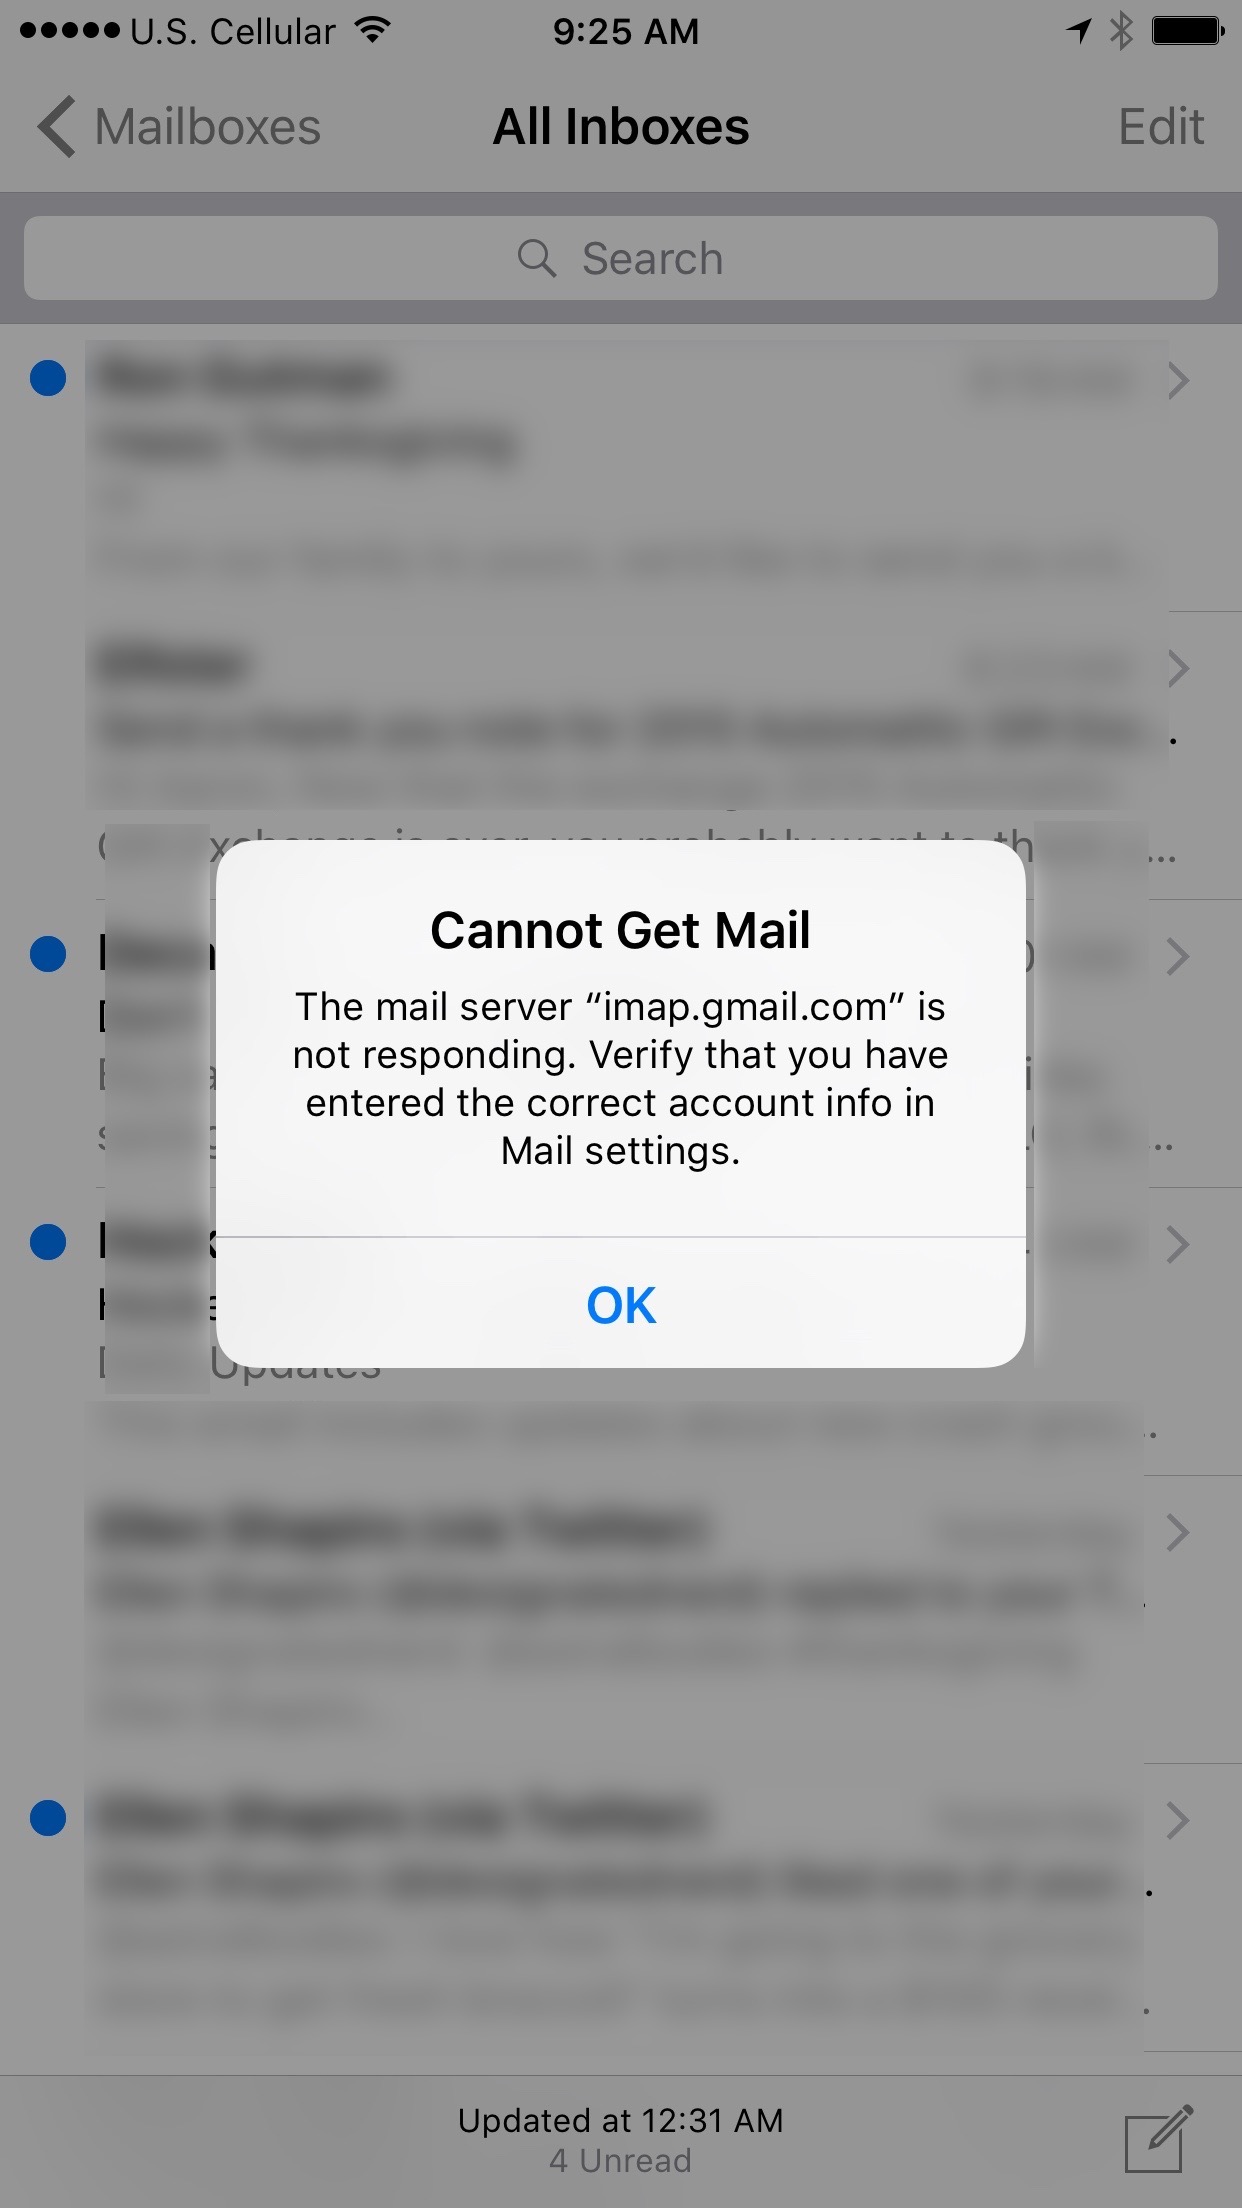 Cannot Get Mail - The mail server imap.gmail.com is not responding. Verify that you have entered the correct account info in Mail settings.